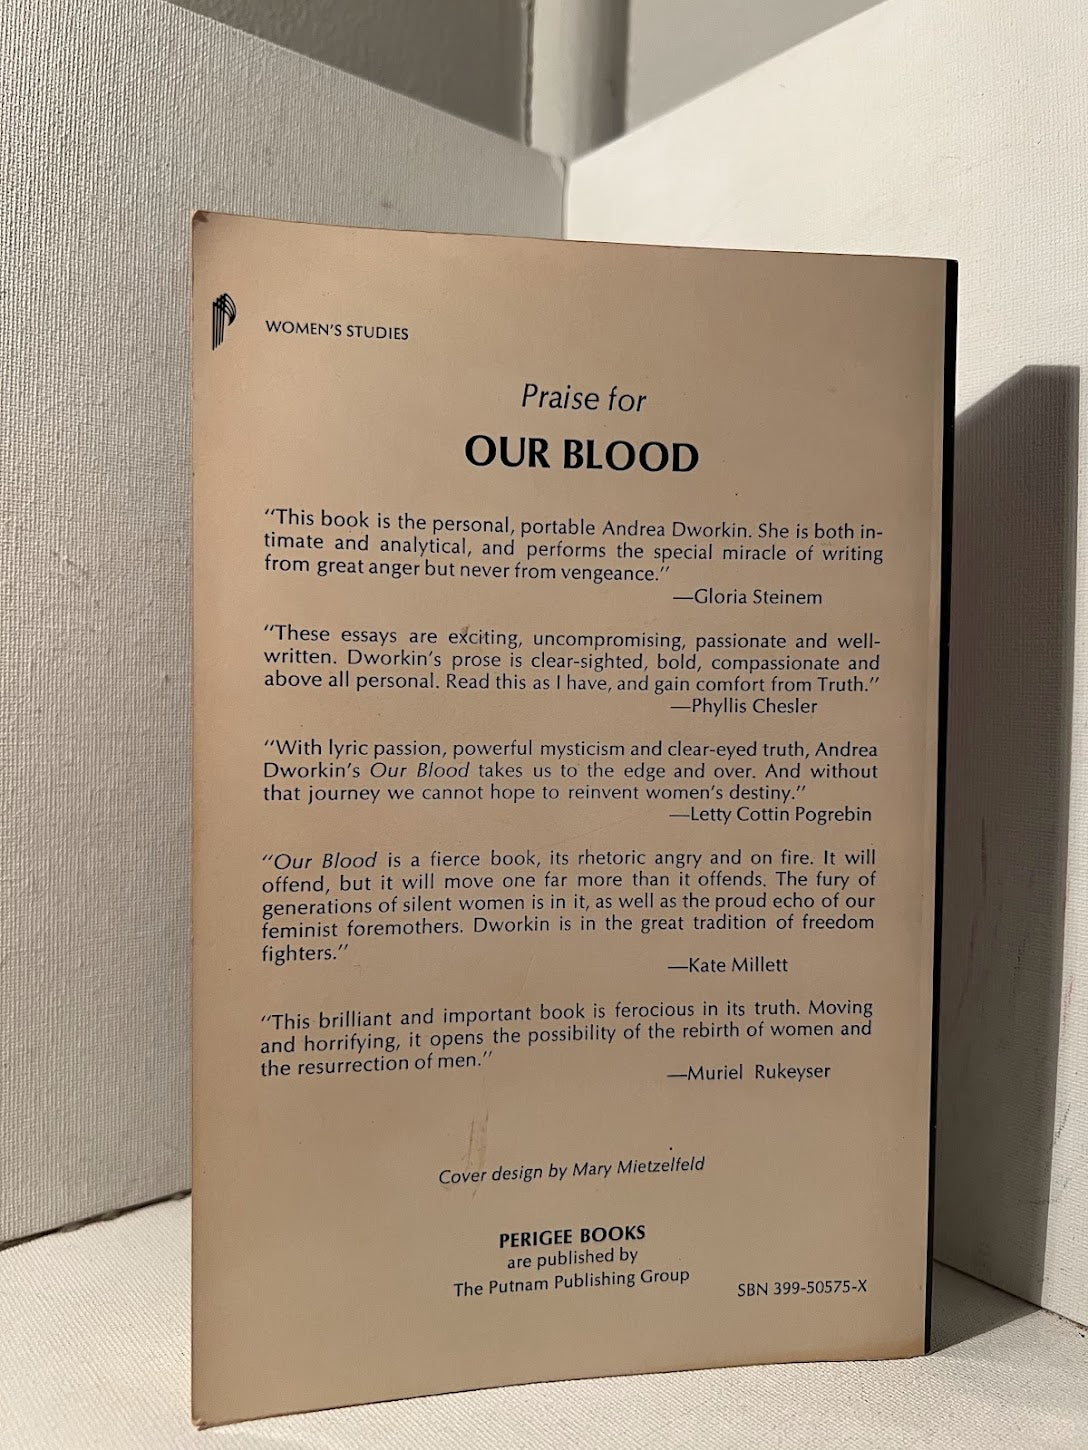 Our Blood by Andrea Dworkin